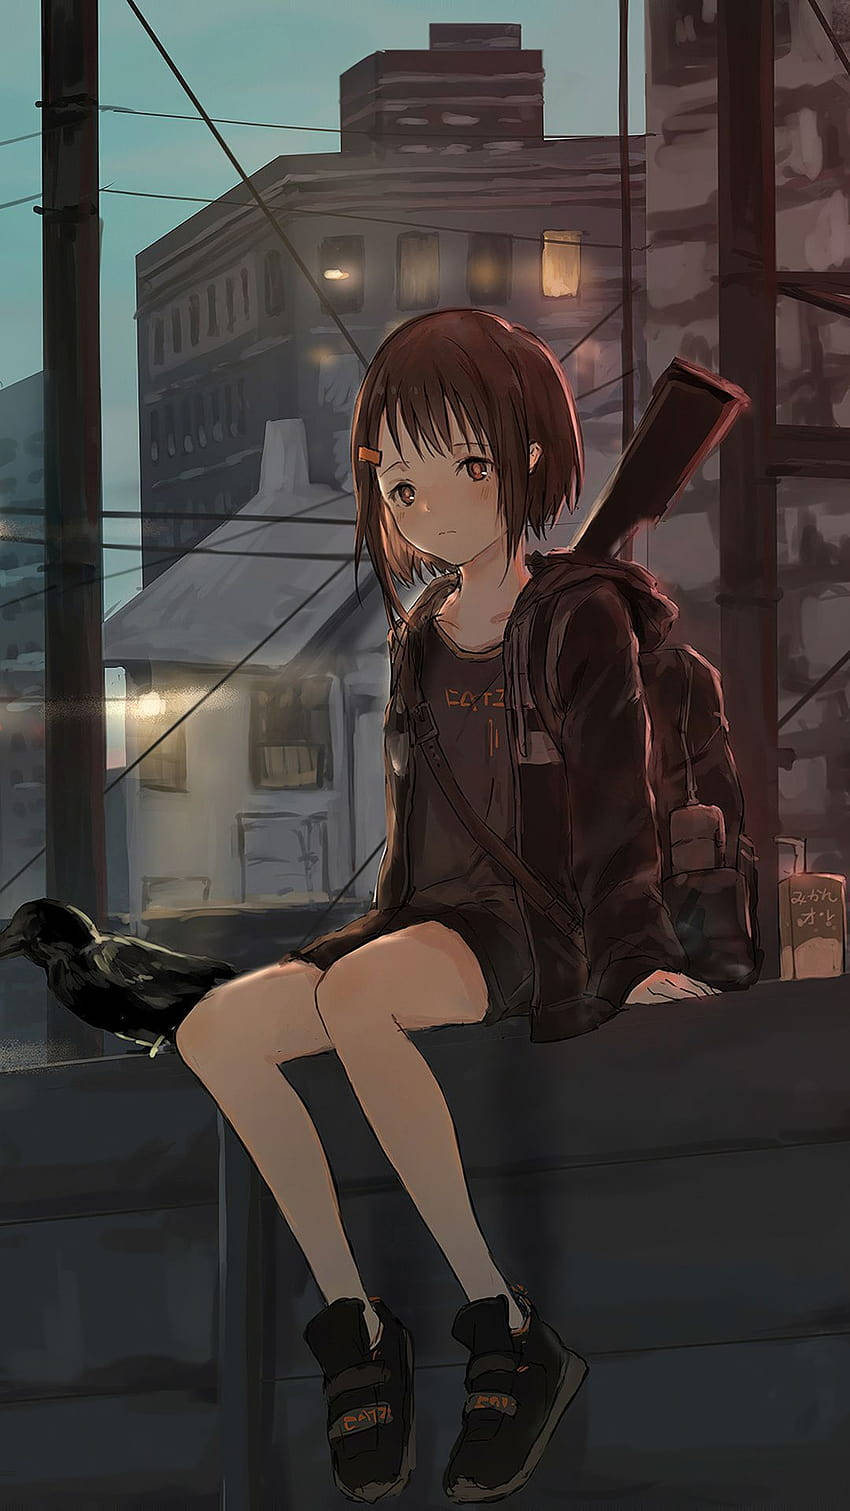 a girl sitting on a ledge with a gun Wallpaper